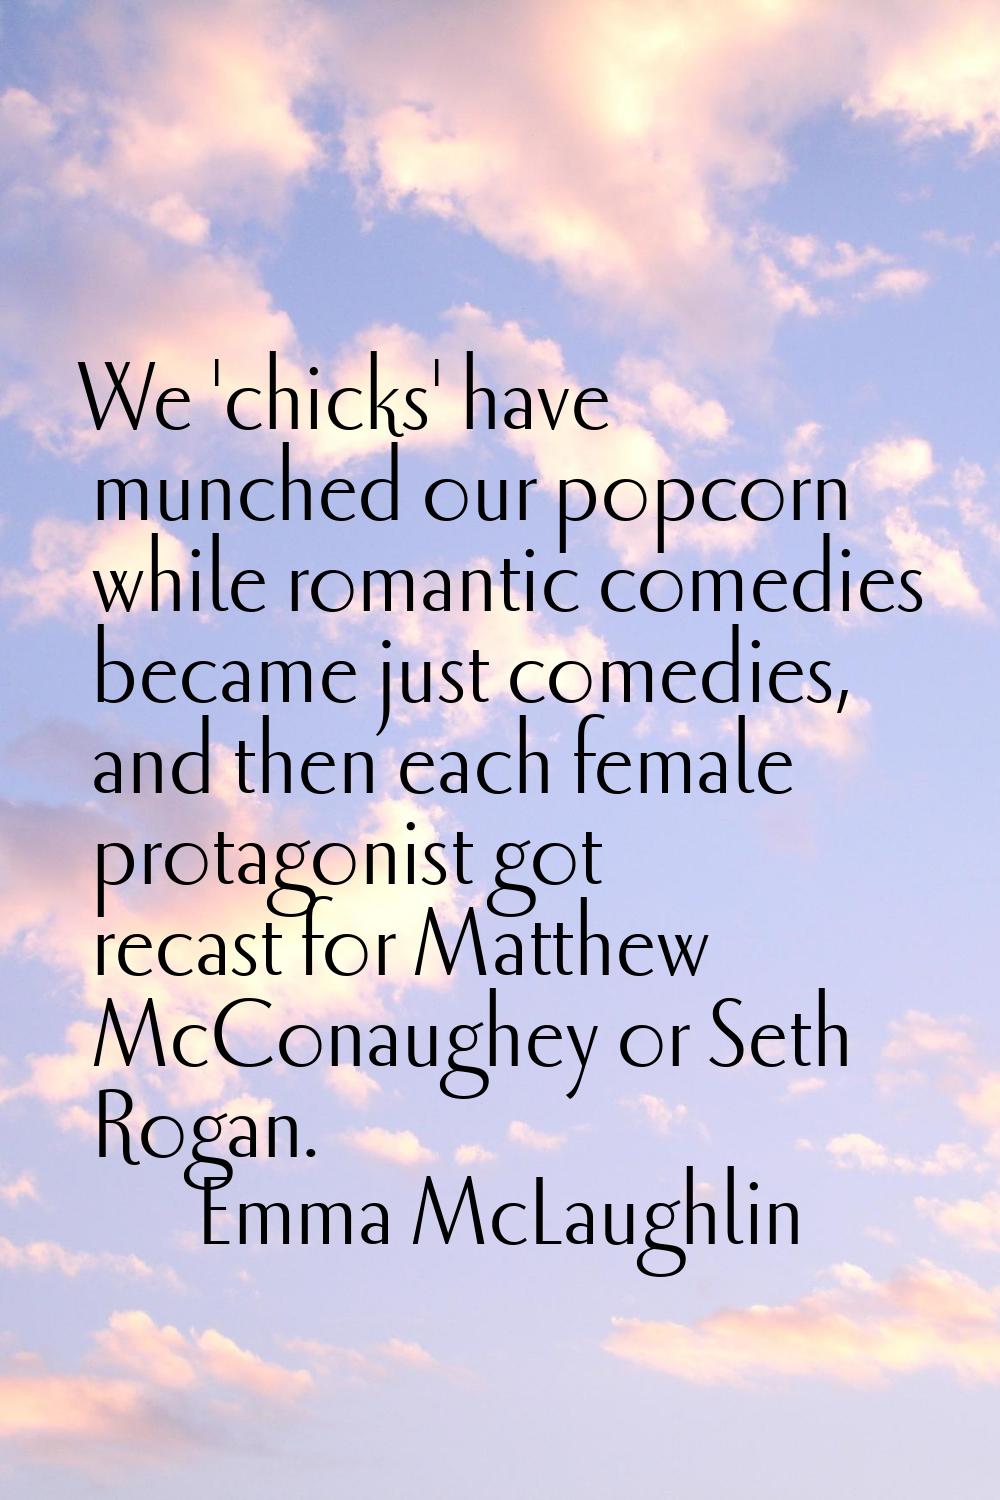 We 'chicks' have munched our popcorn while romantic comedies became just comedies, and then each fe